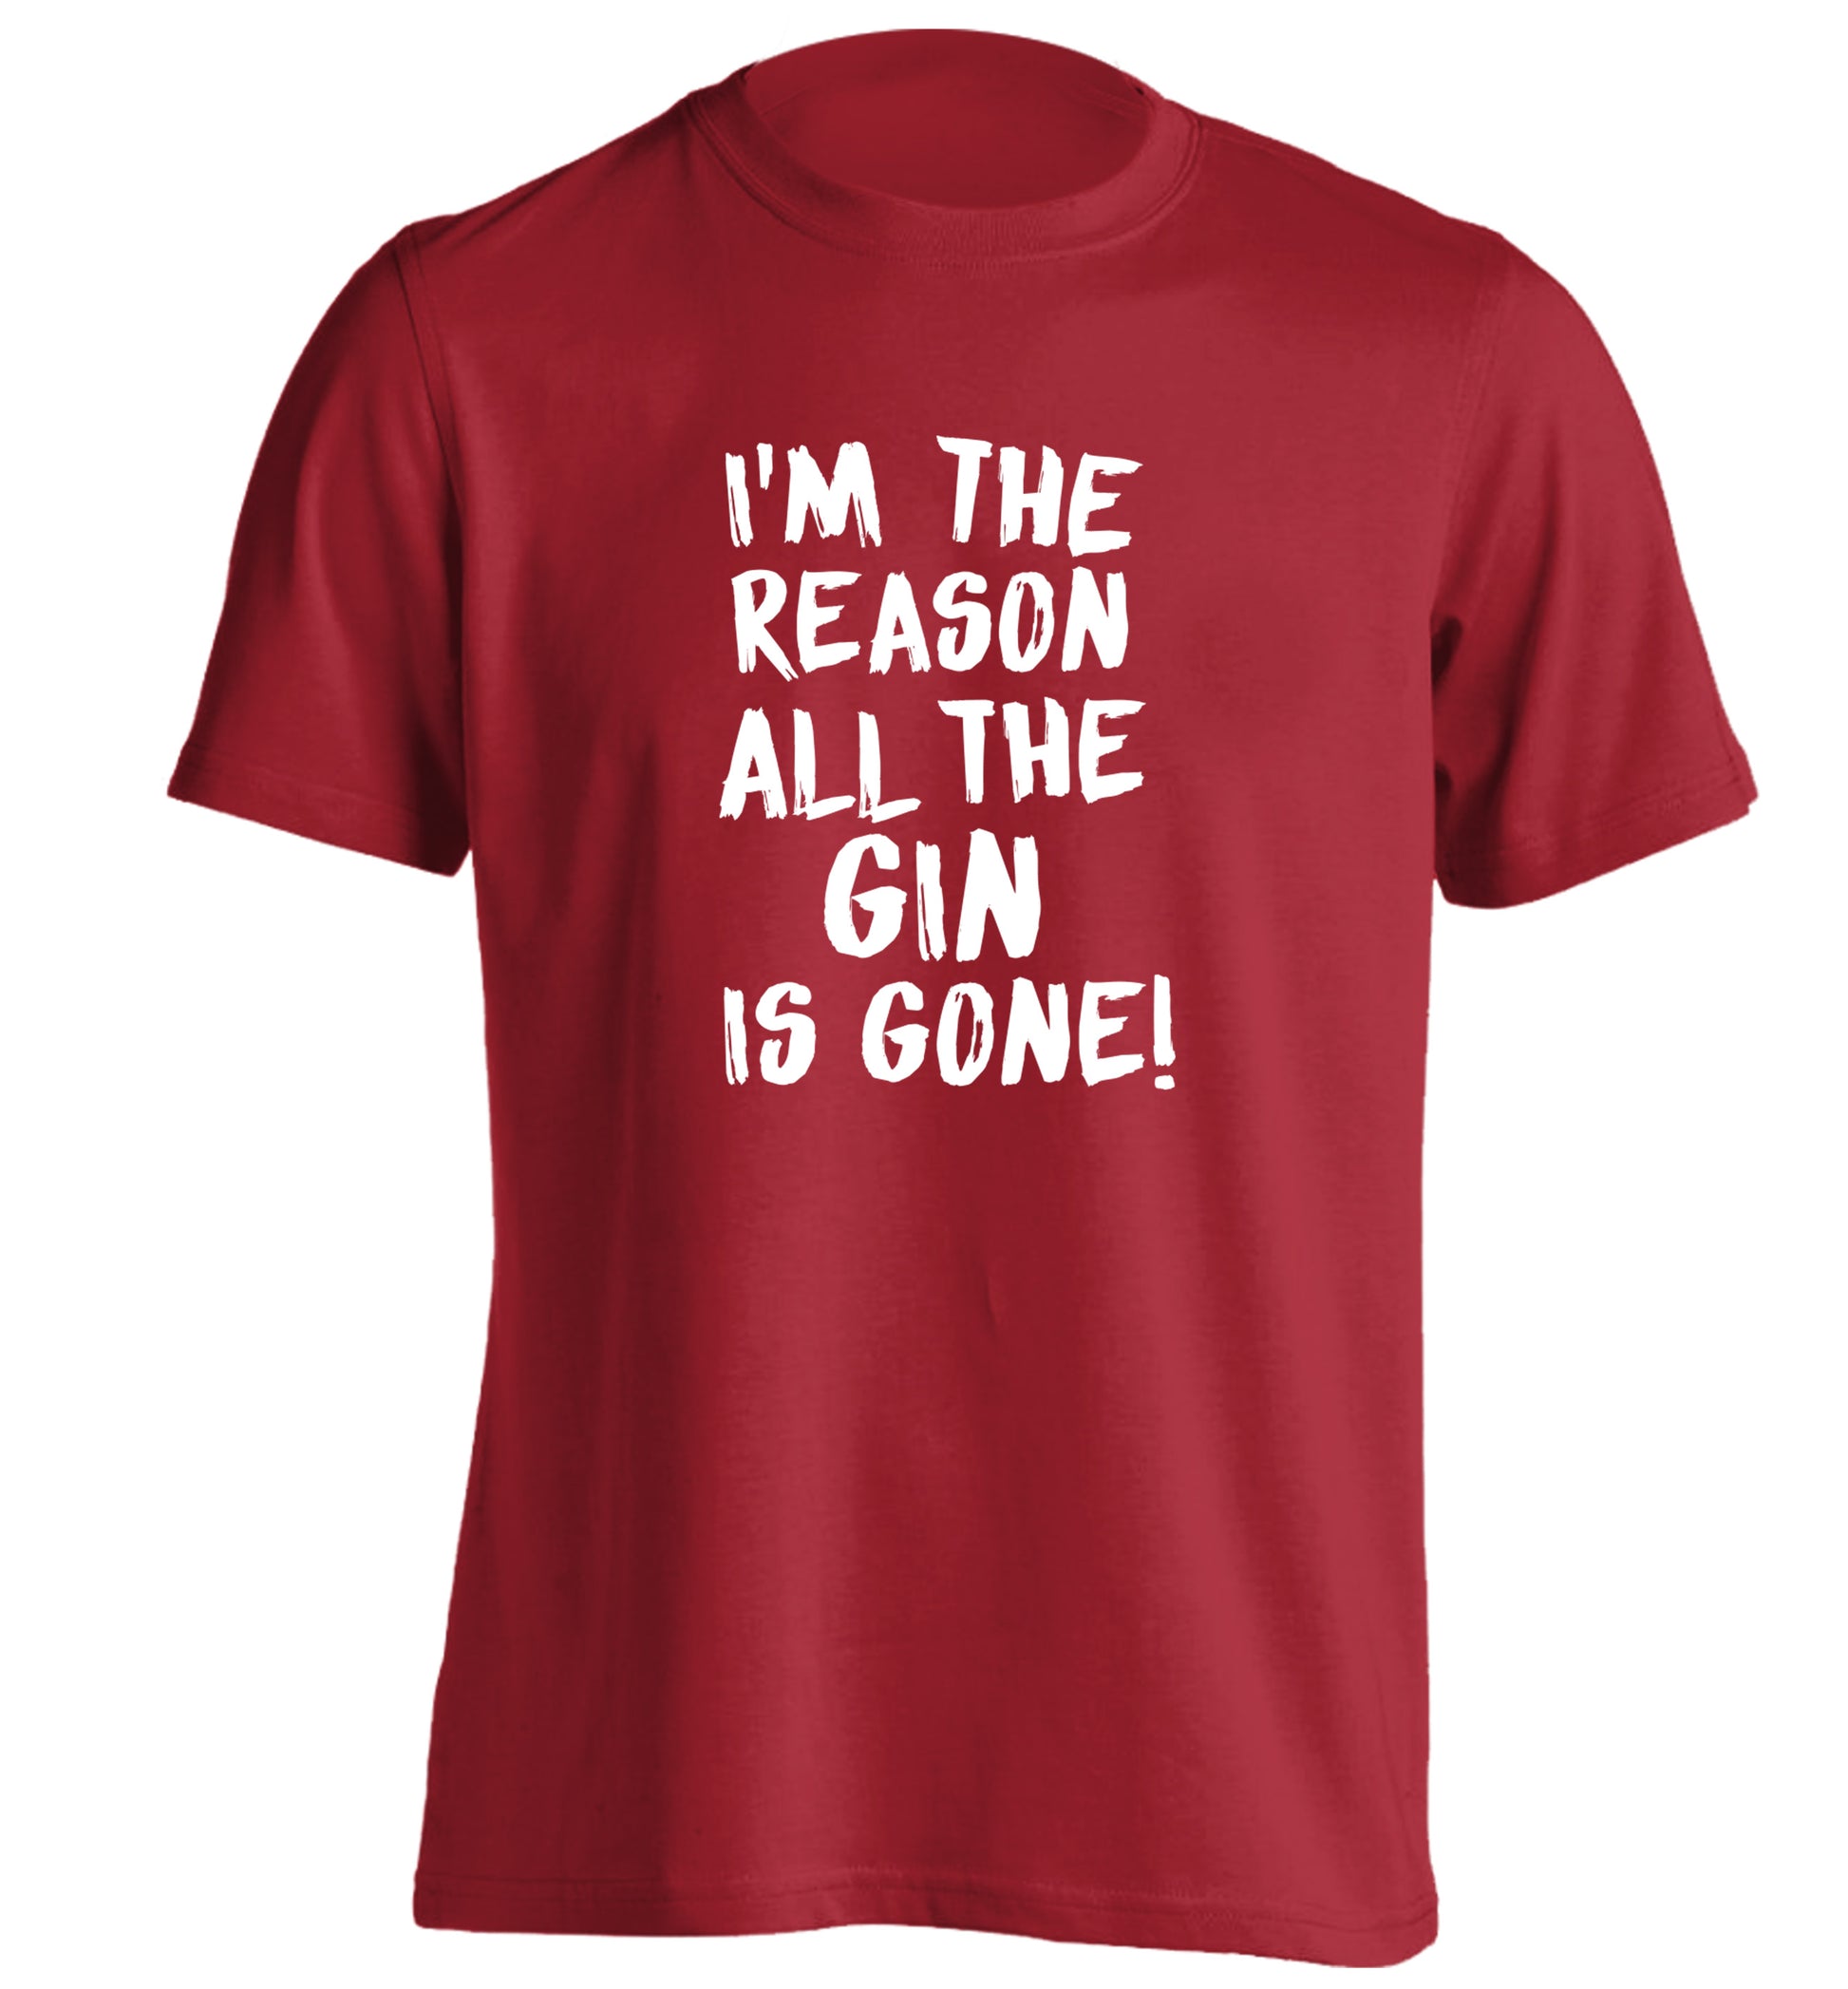 I'm the reason all the gin is gone adults unisex red Tshirt 2XL